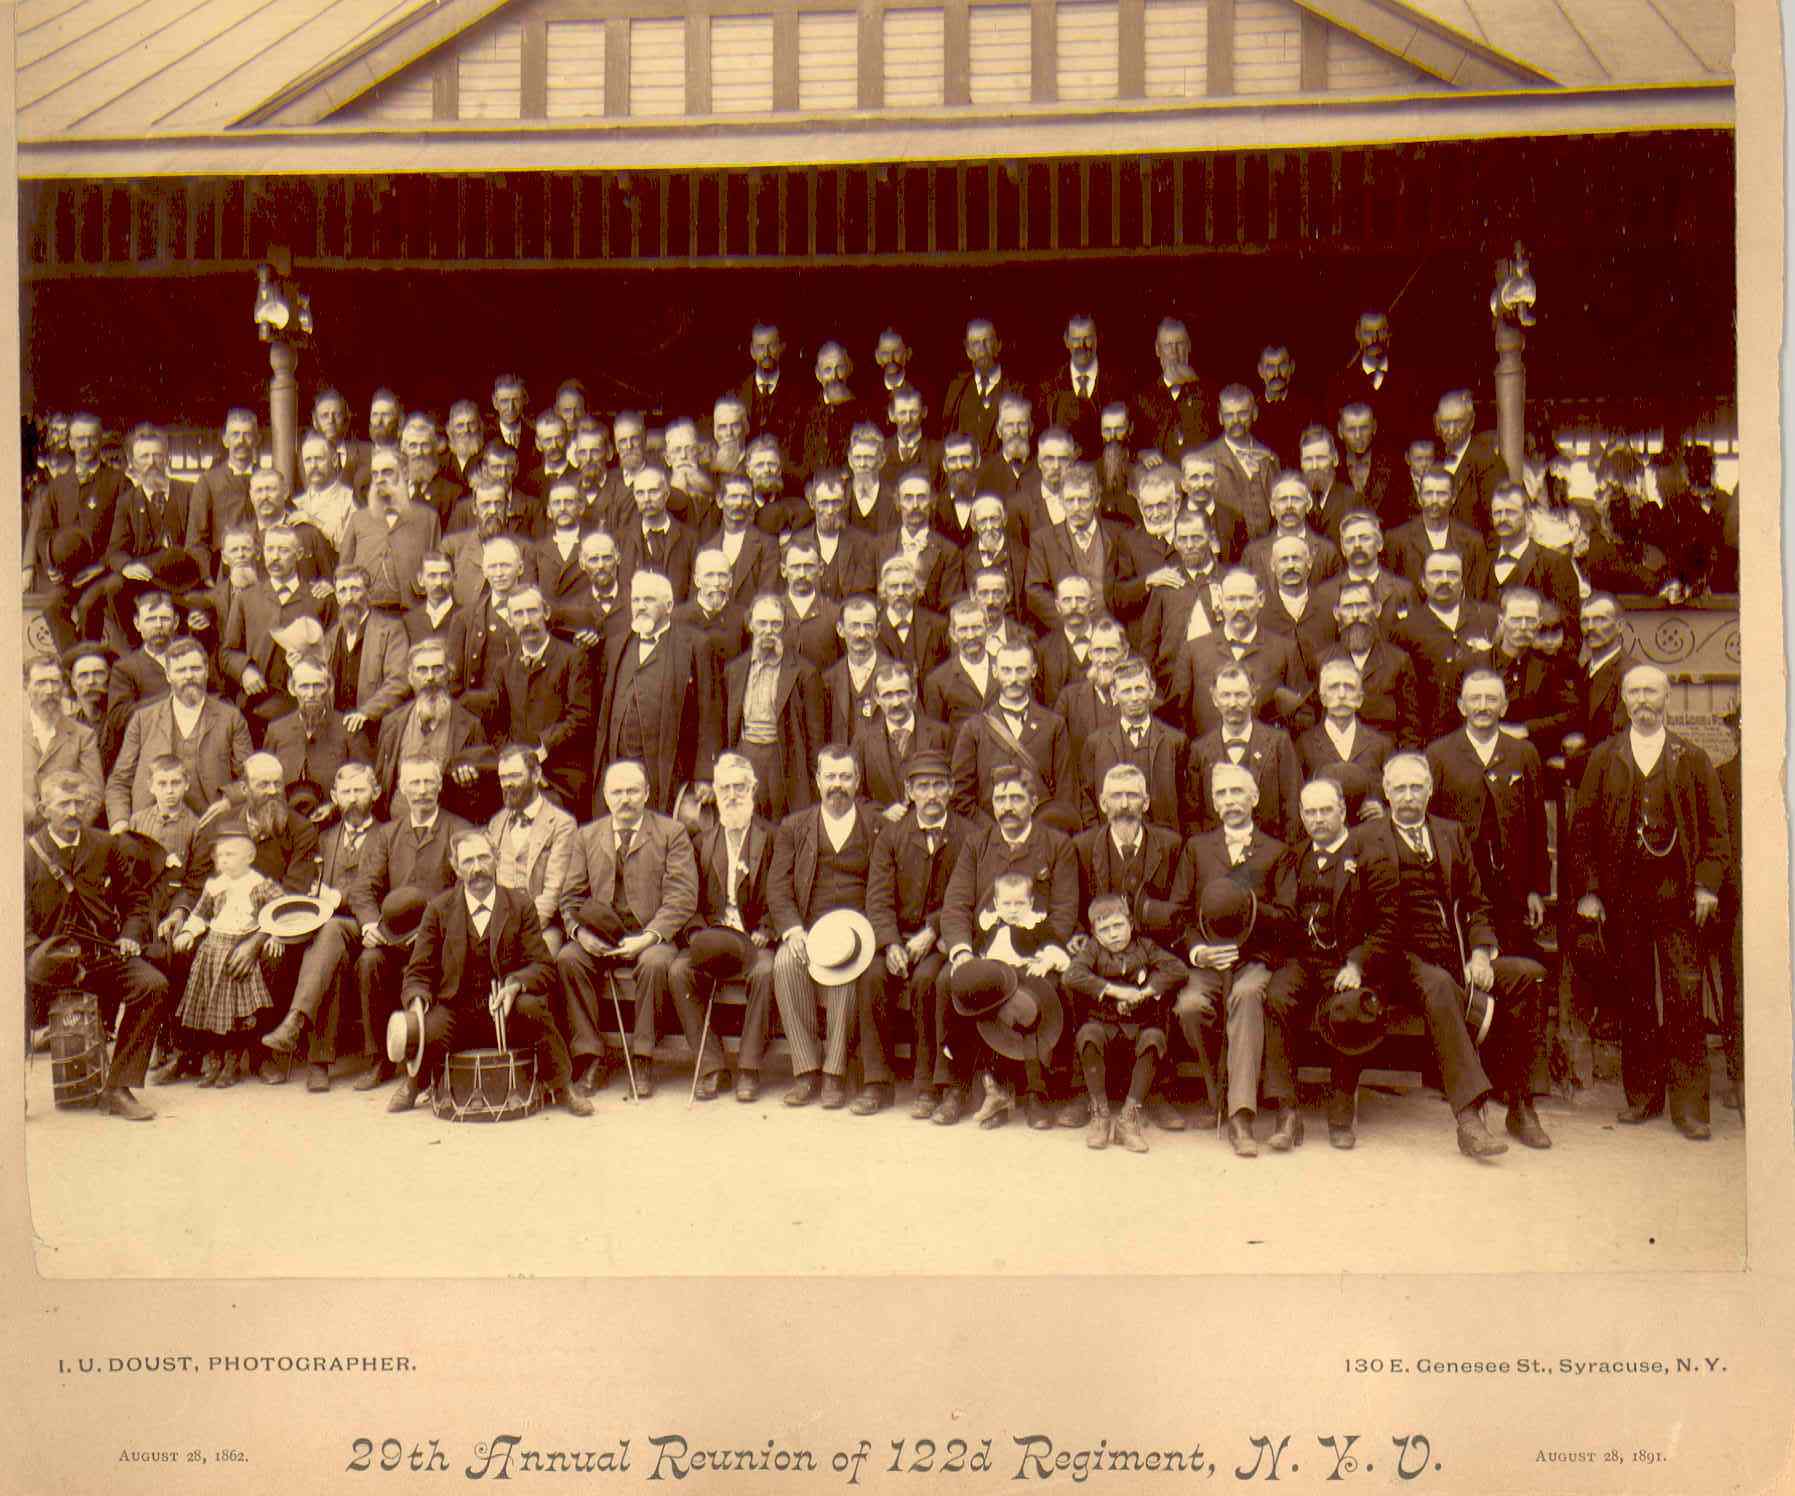 The 29th Reunion of the the 122nd New York Volunteer Regiment held in Syracuse, NY on August 28th 1891.  The white hair gentleman sitting front row center is my great, great, great grandfather, Col. Silas Titus, who was the commander of the regiment during the Civil War.